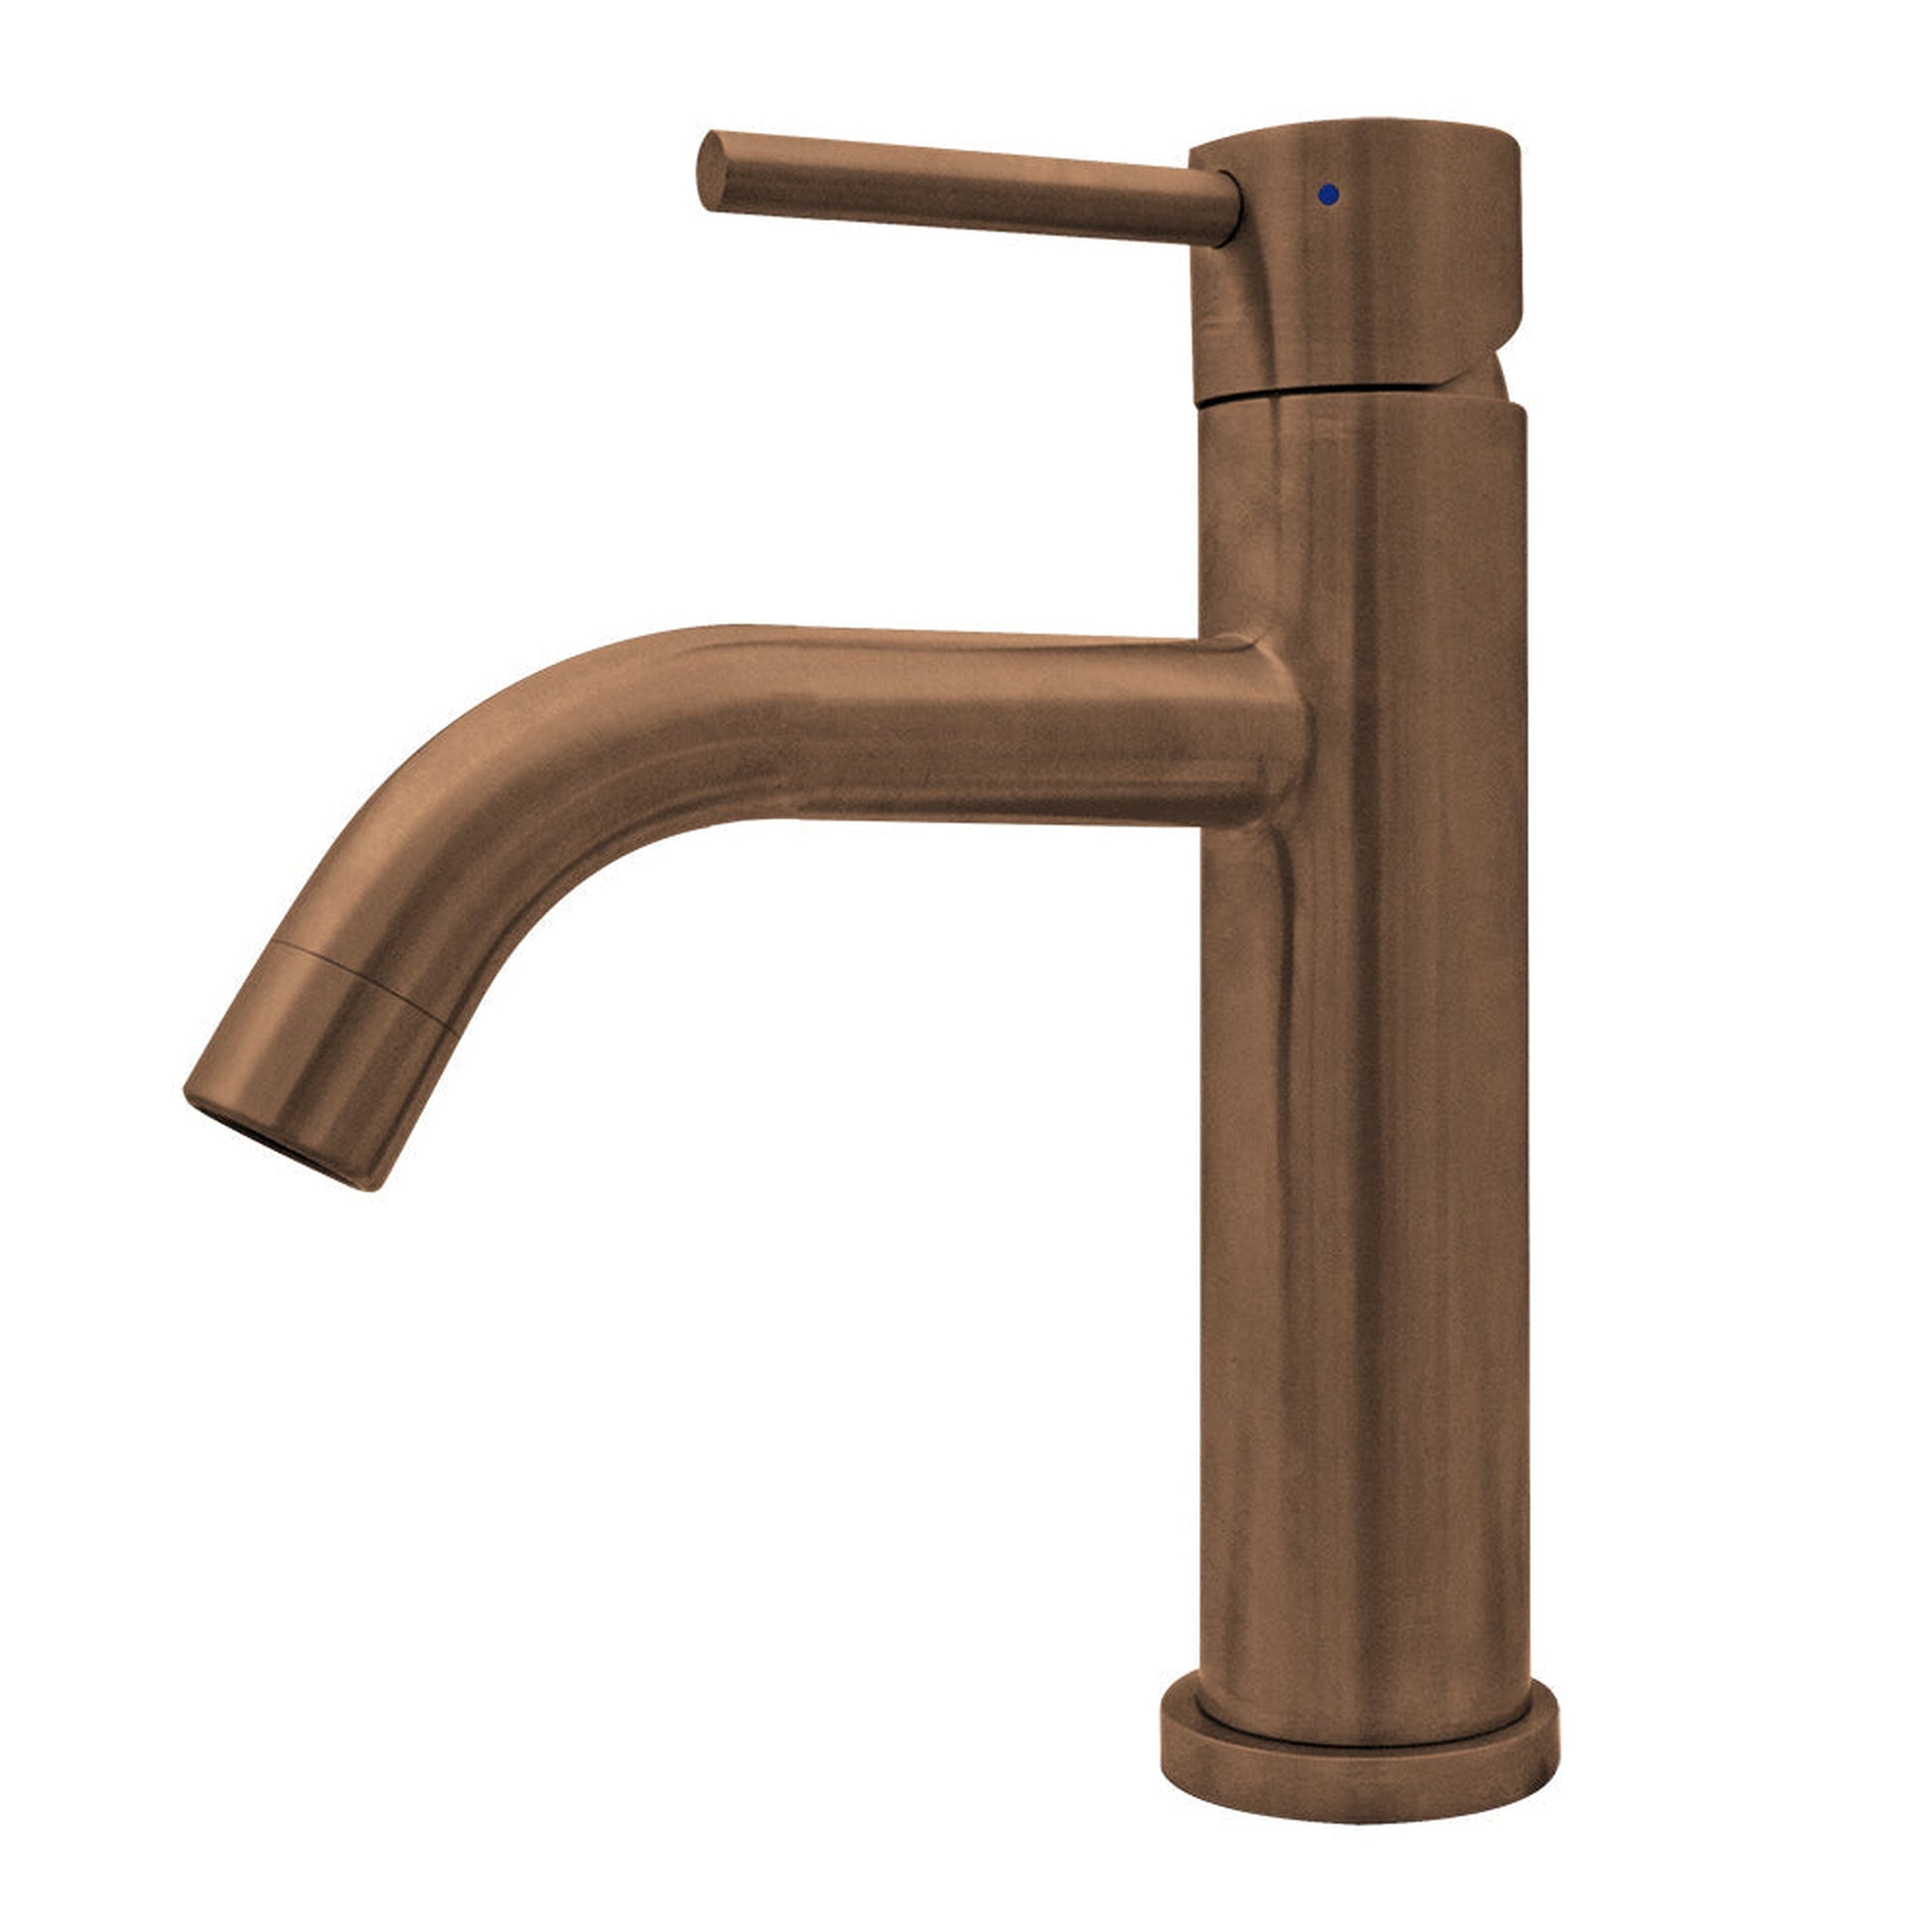 Whitehaus Waterhaus WHS8601-SB-CO Copper Lead-Free Solid Stainless Steel Single Lever Elevated Lavatory Faucet